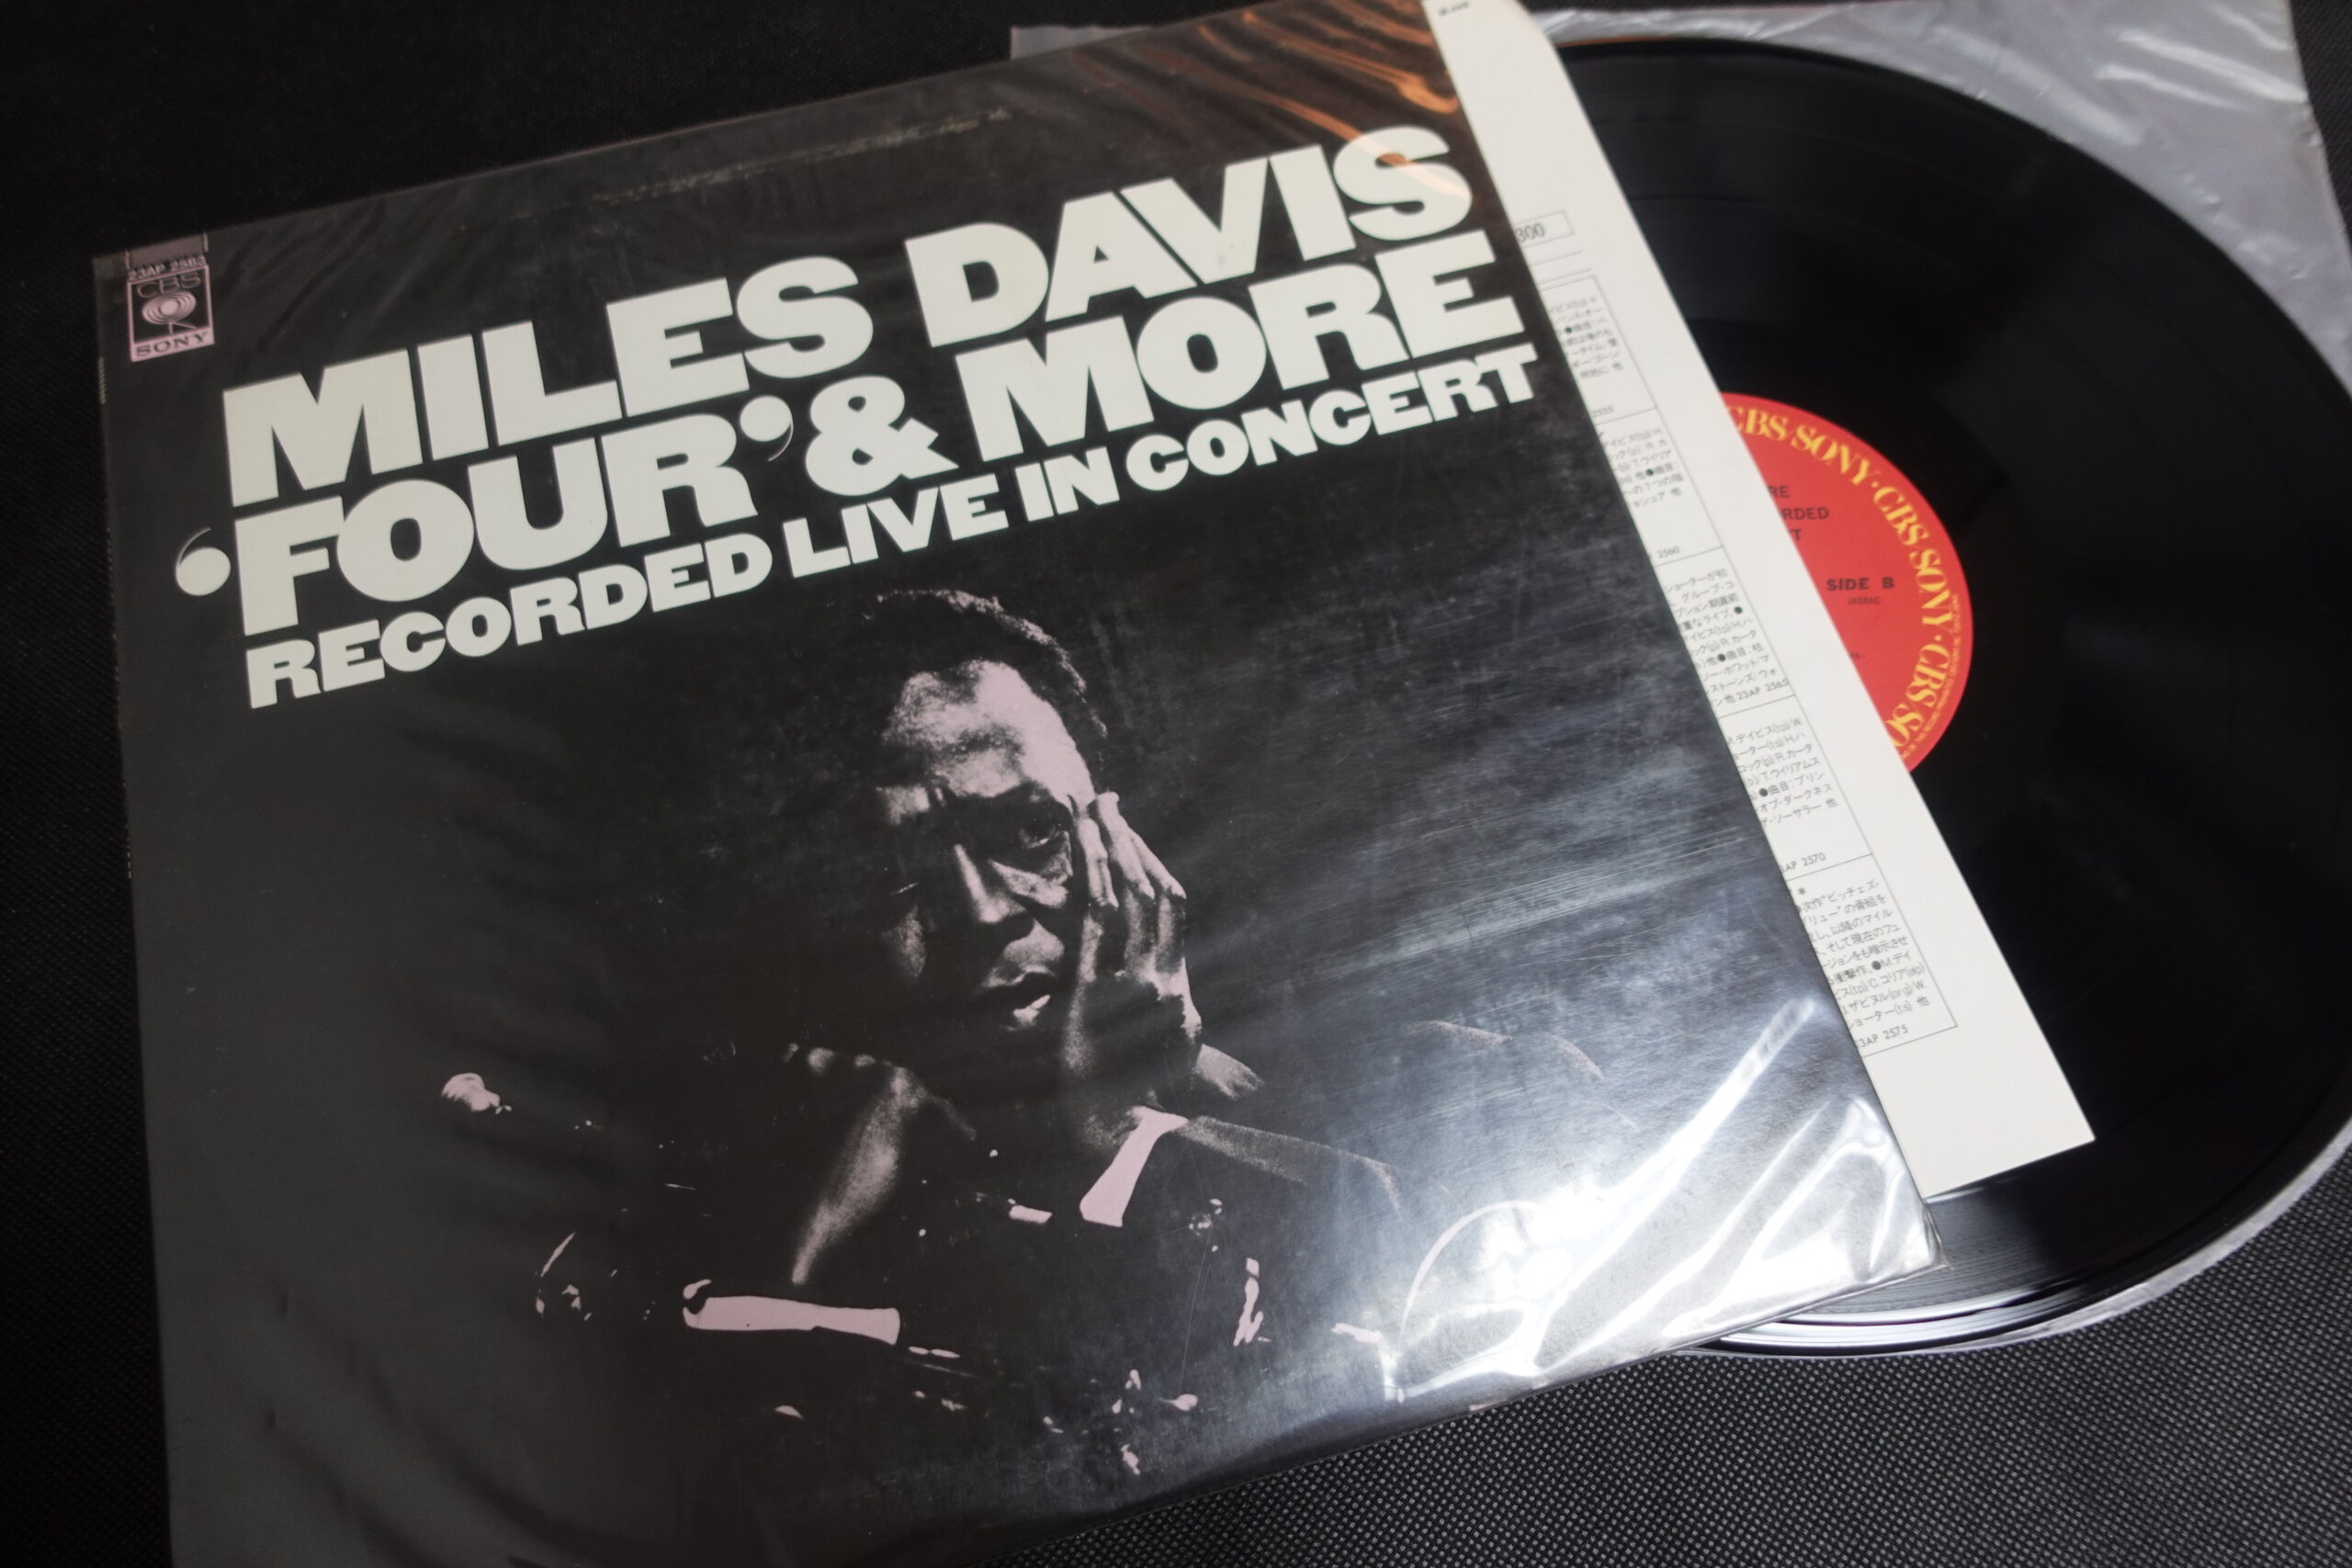 Miles Davis ‎– 'Four' & More - Recorded Live In Concert